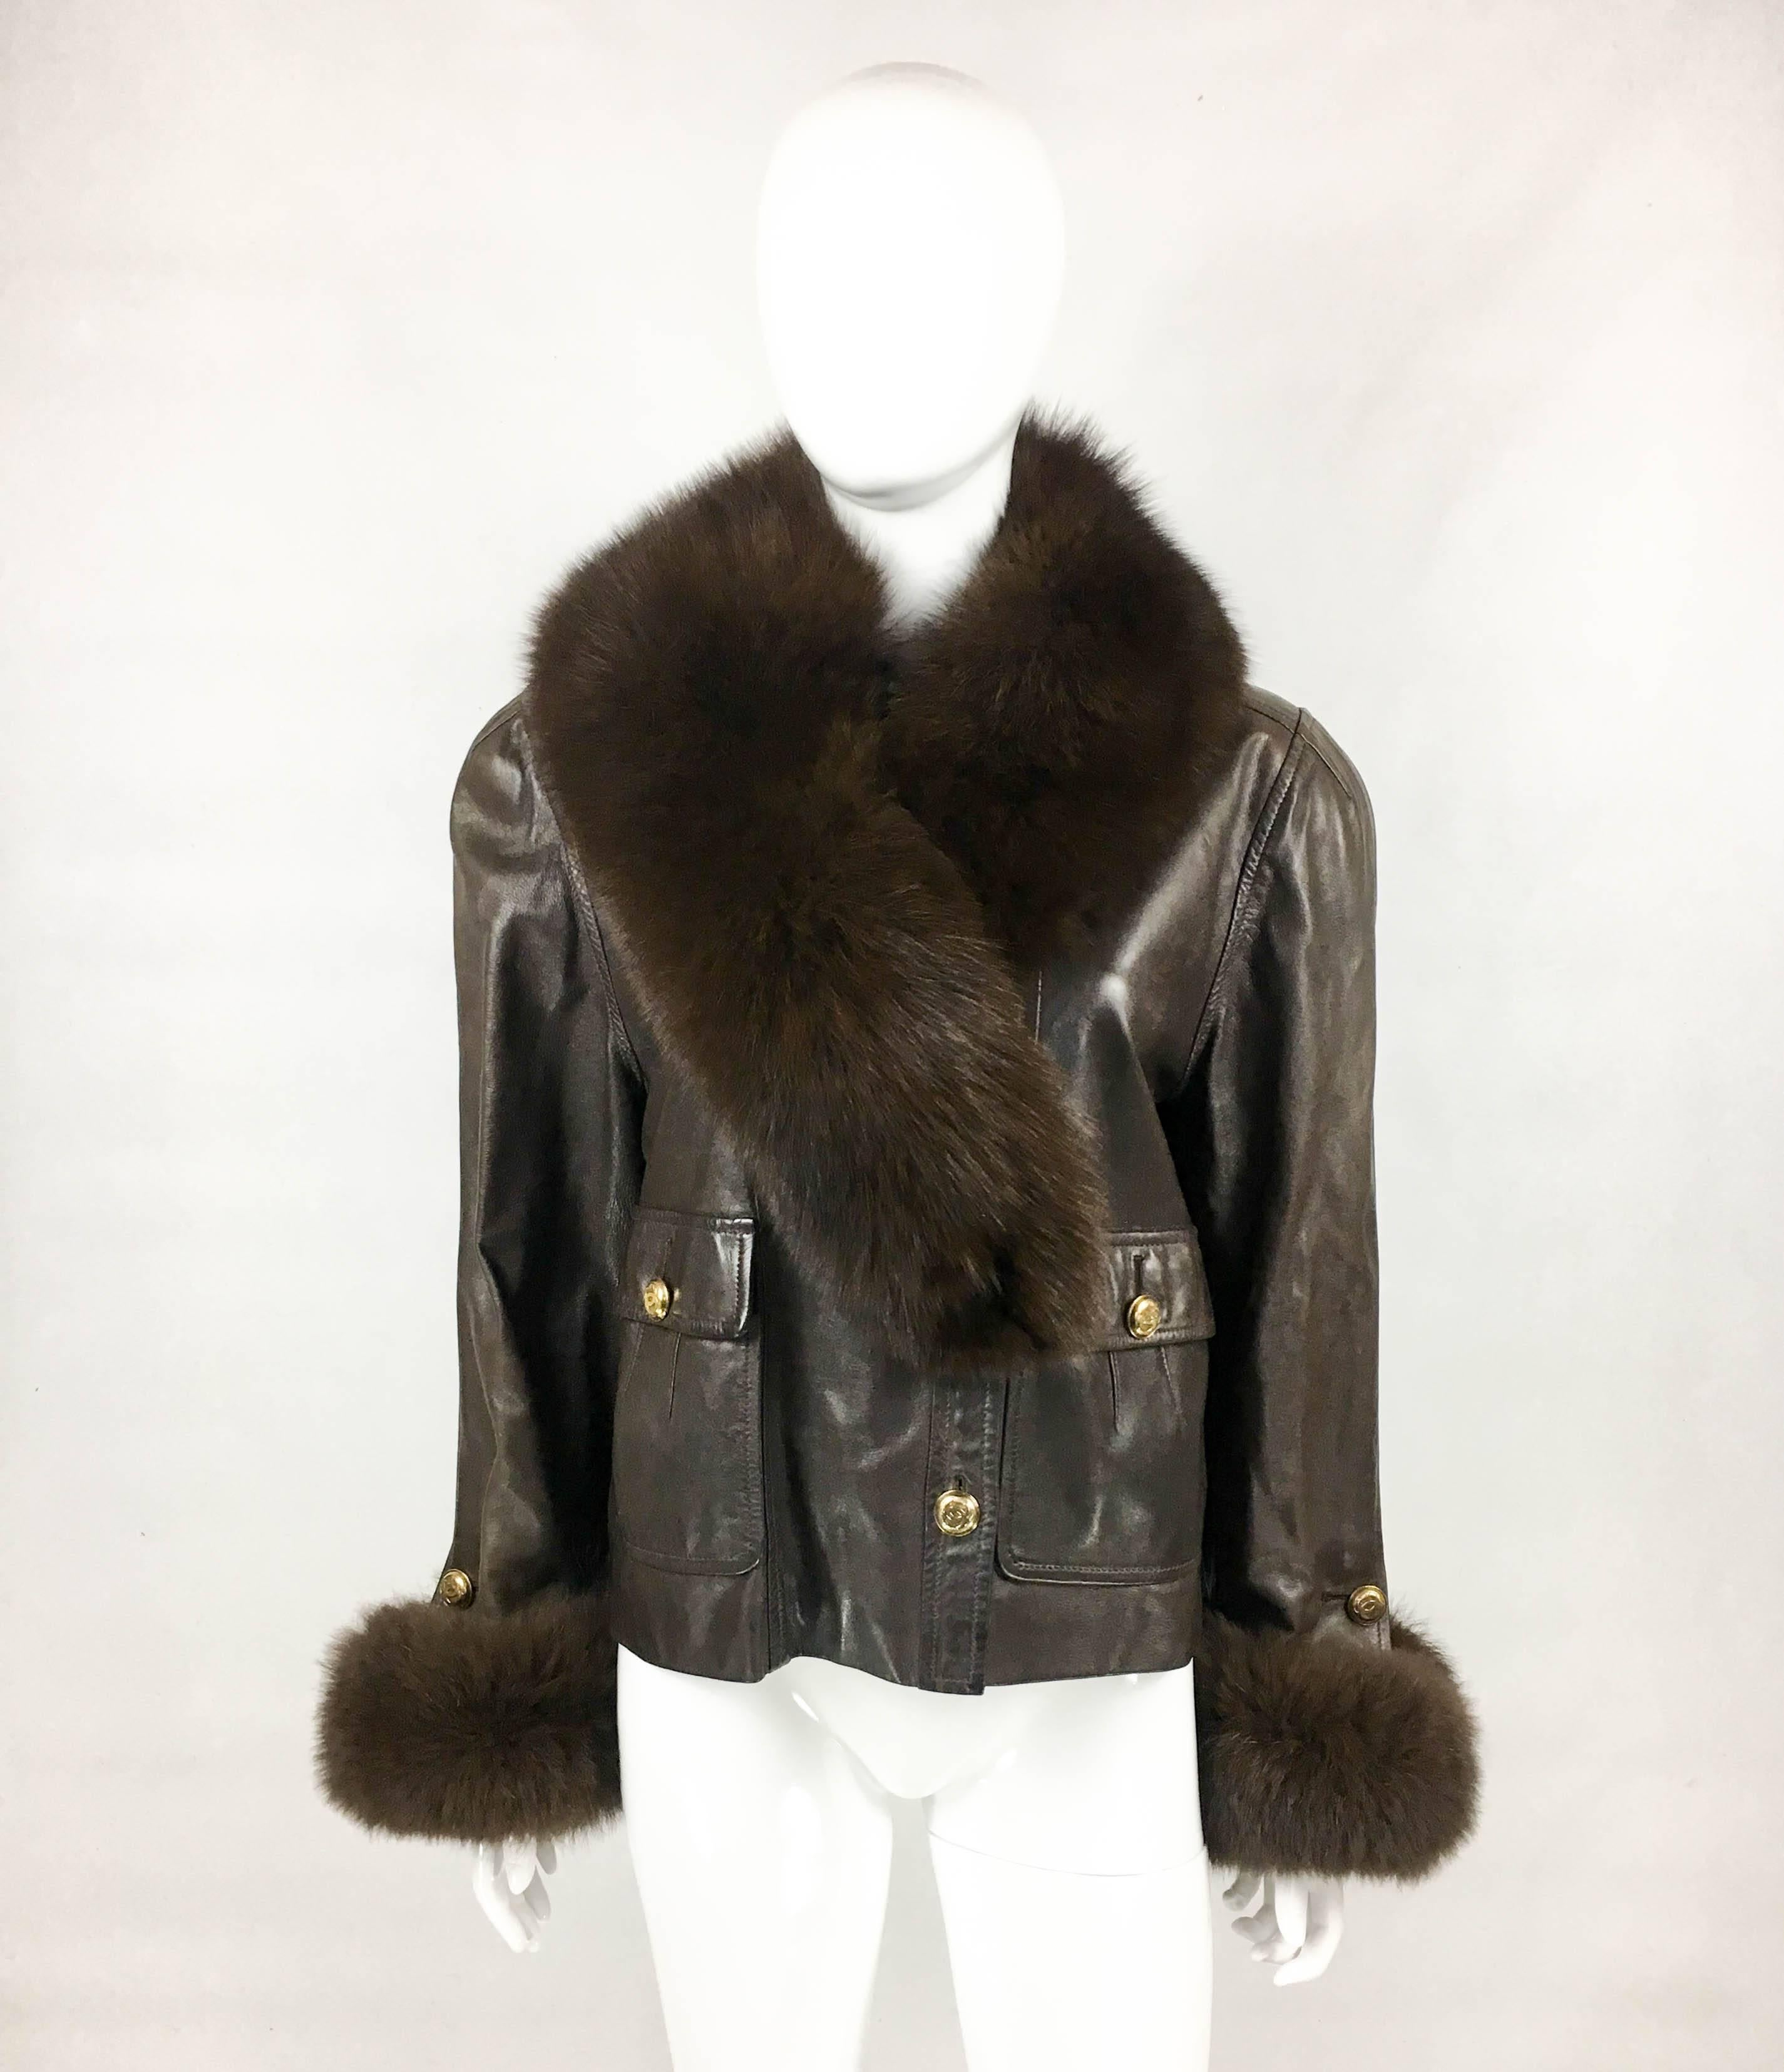 Vintage Chanel Leather Jacket with Fur Collar. This glamorous jacket by Chanel was created in the 1980’s. In soft chocolate brown leather, it features fox fur cuffs and removable collar (attachable to the third button down the front). The